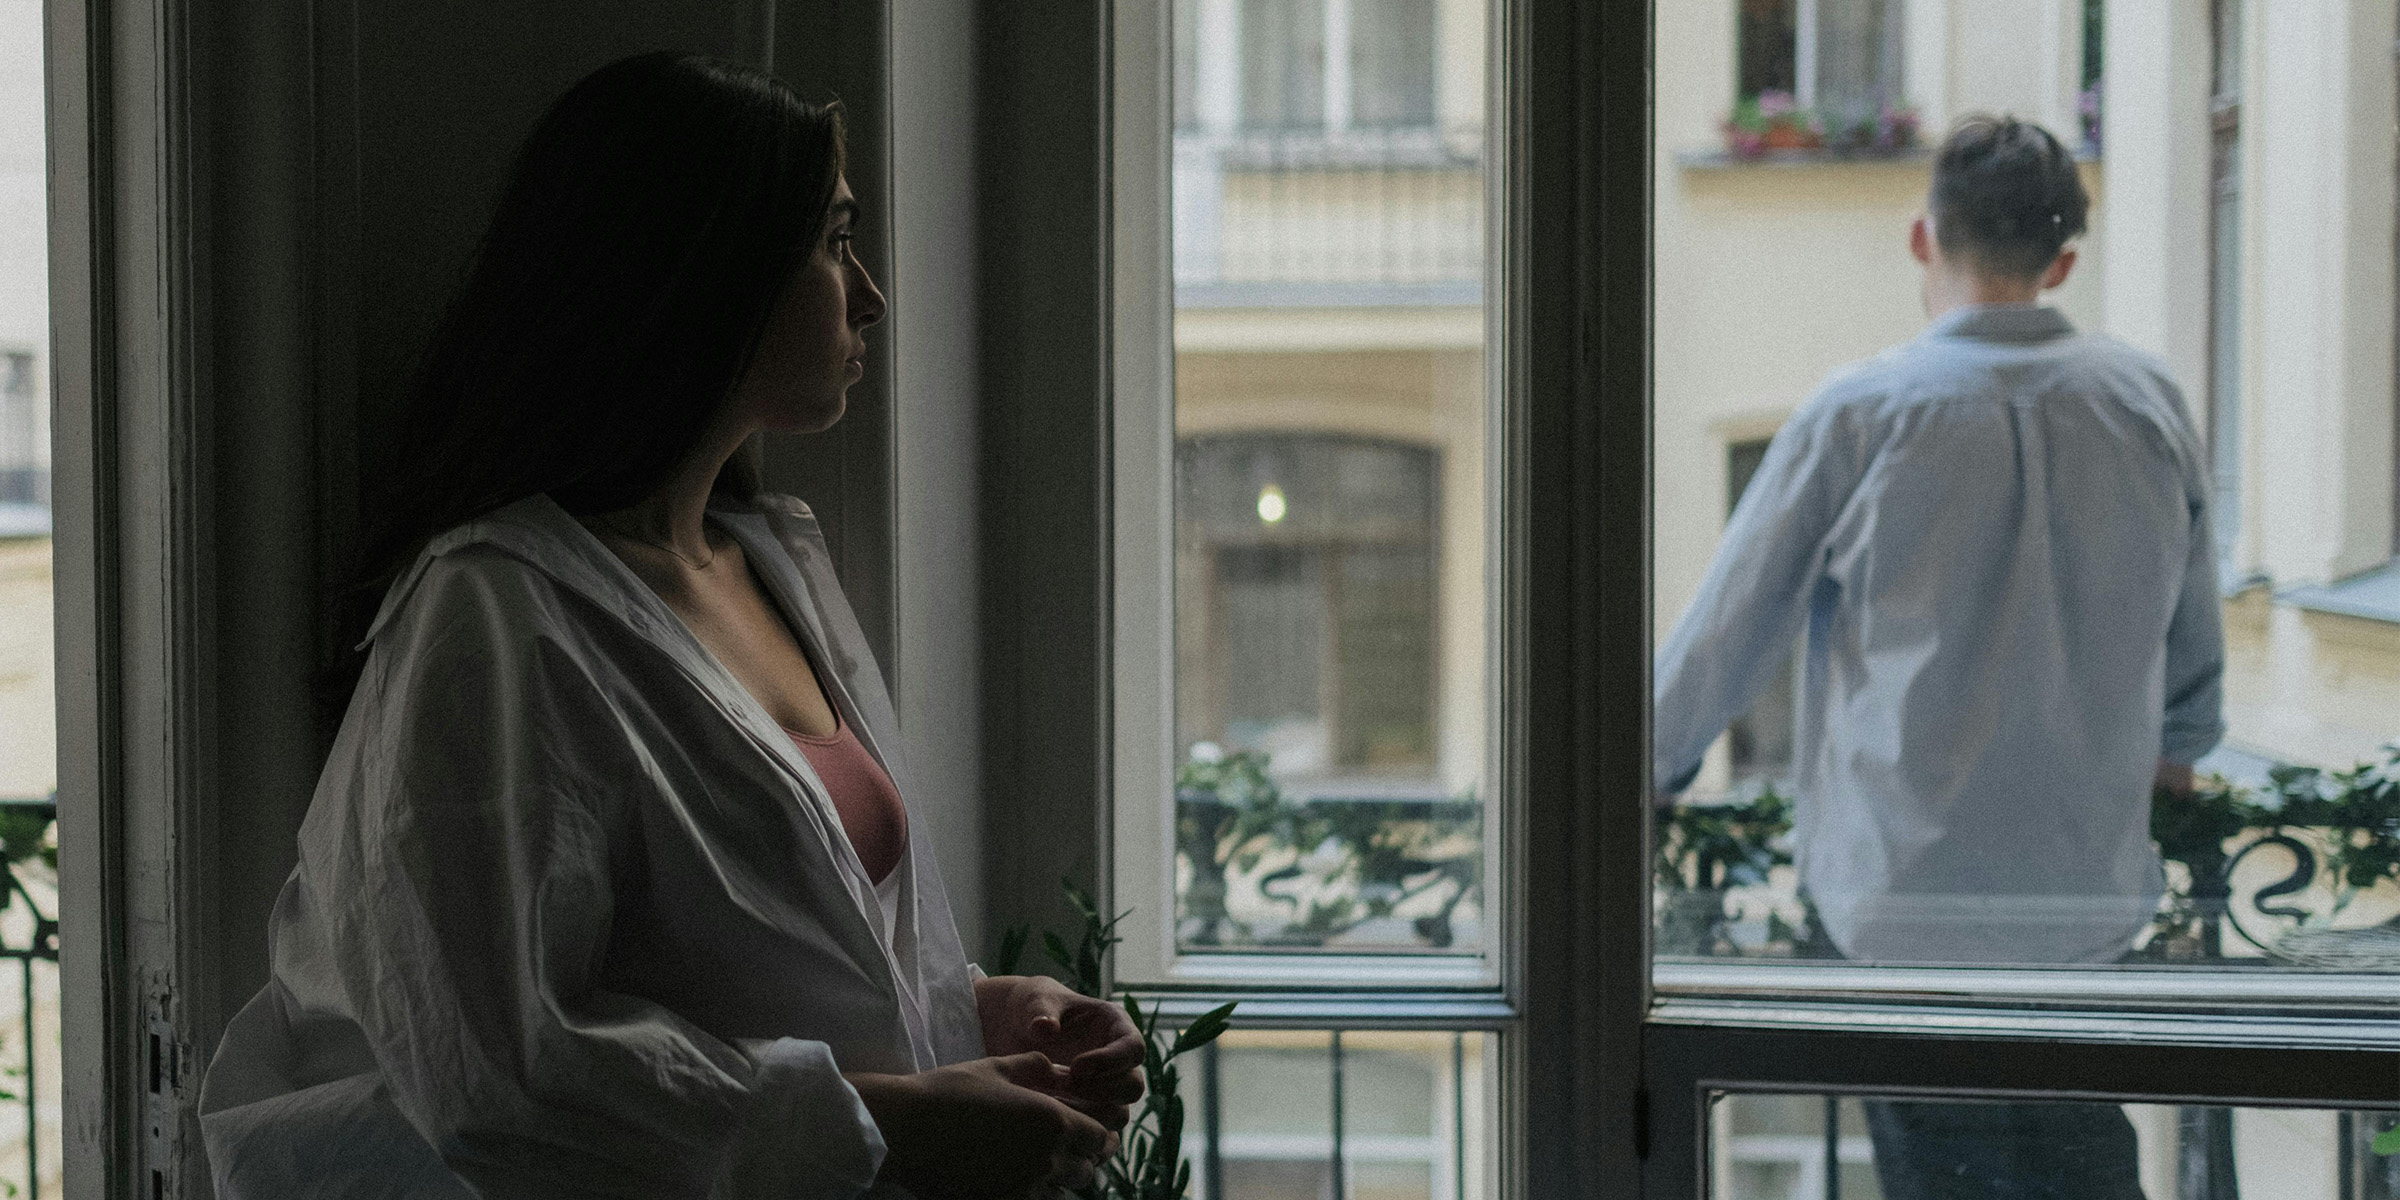 Woman watching a man on a balcony | Source: Pexels